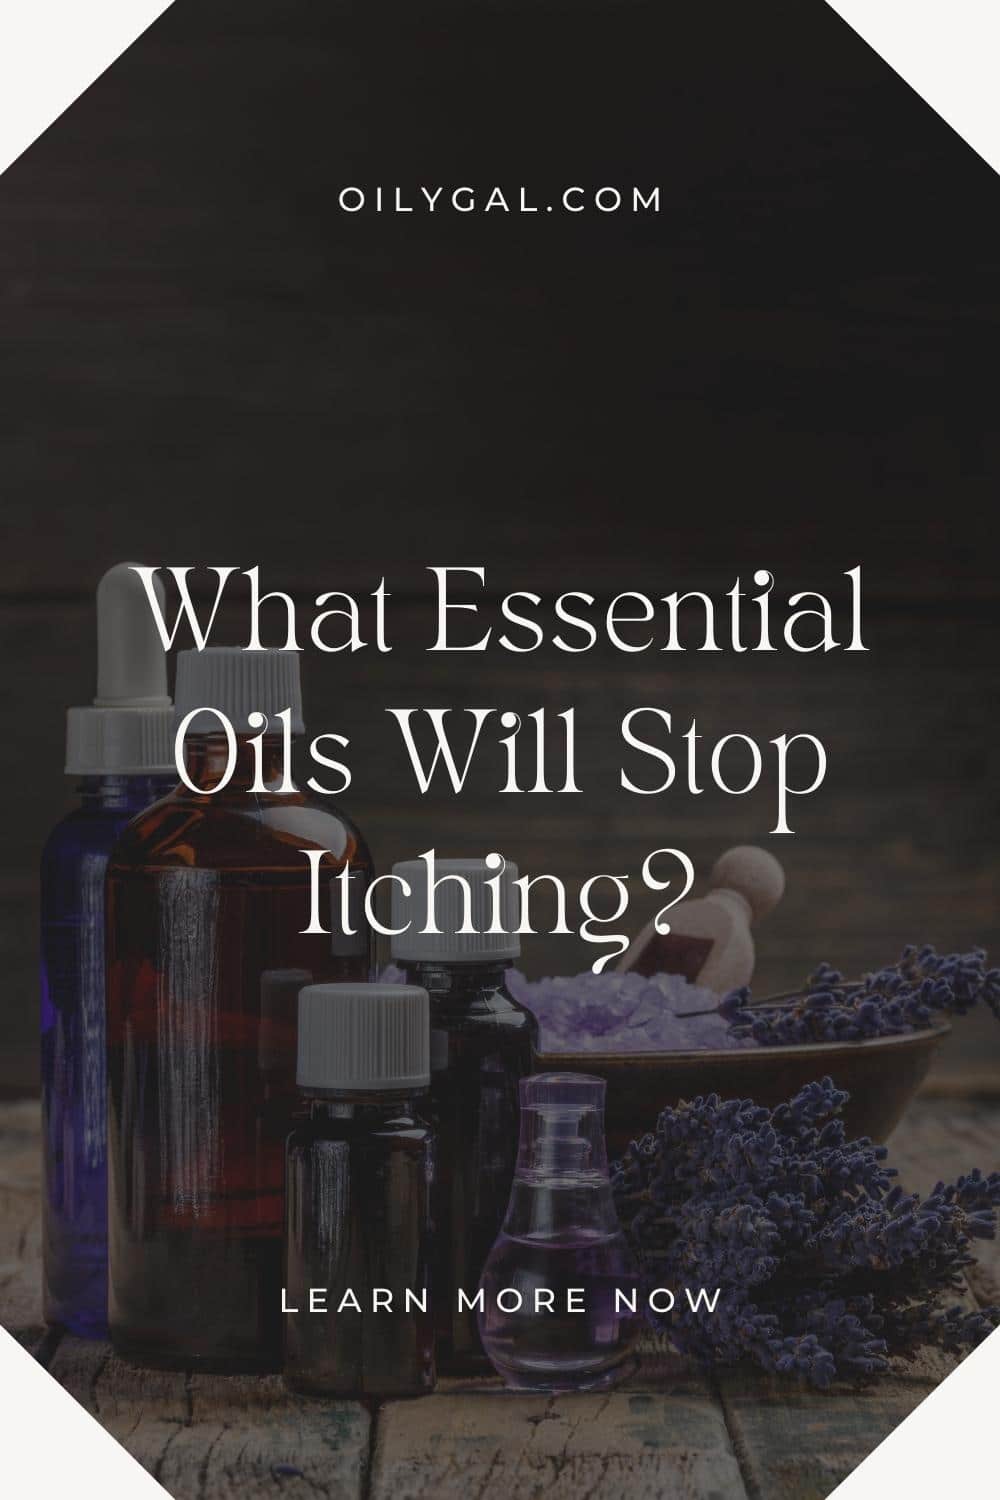 What essential oil will stop itching